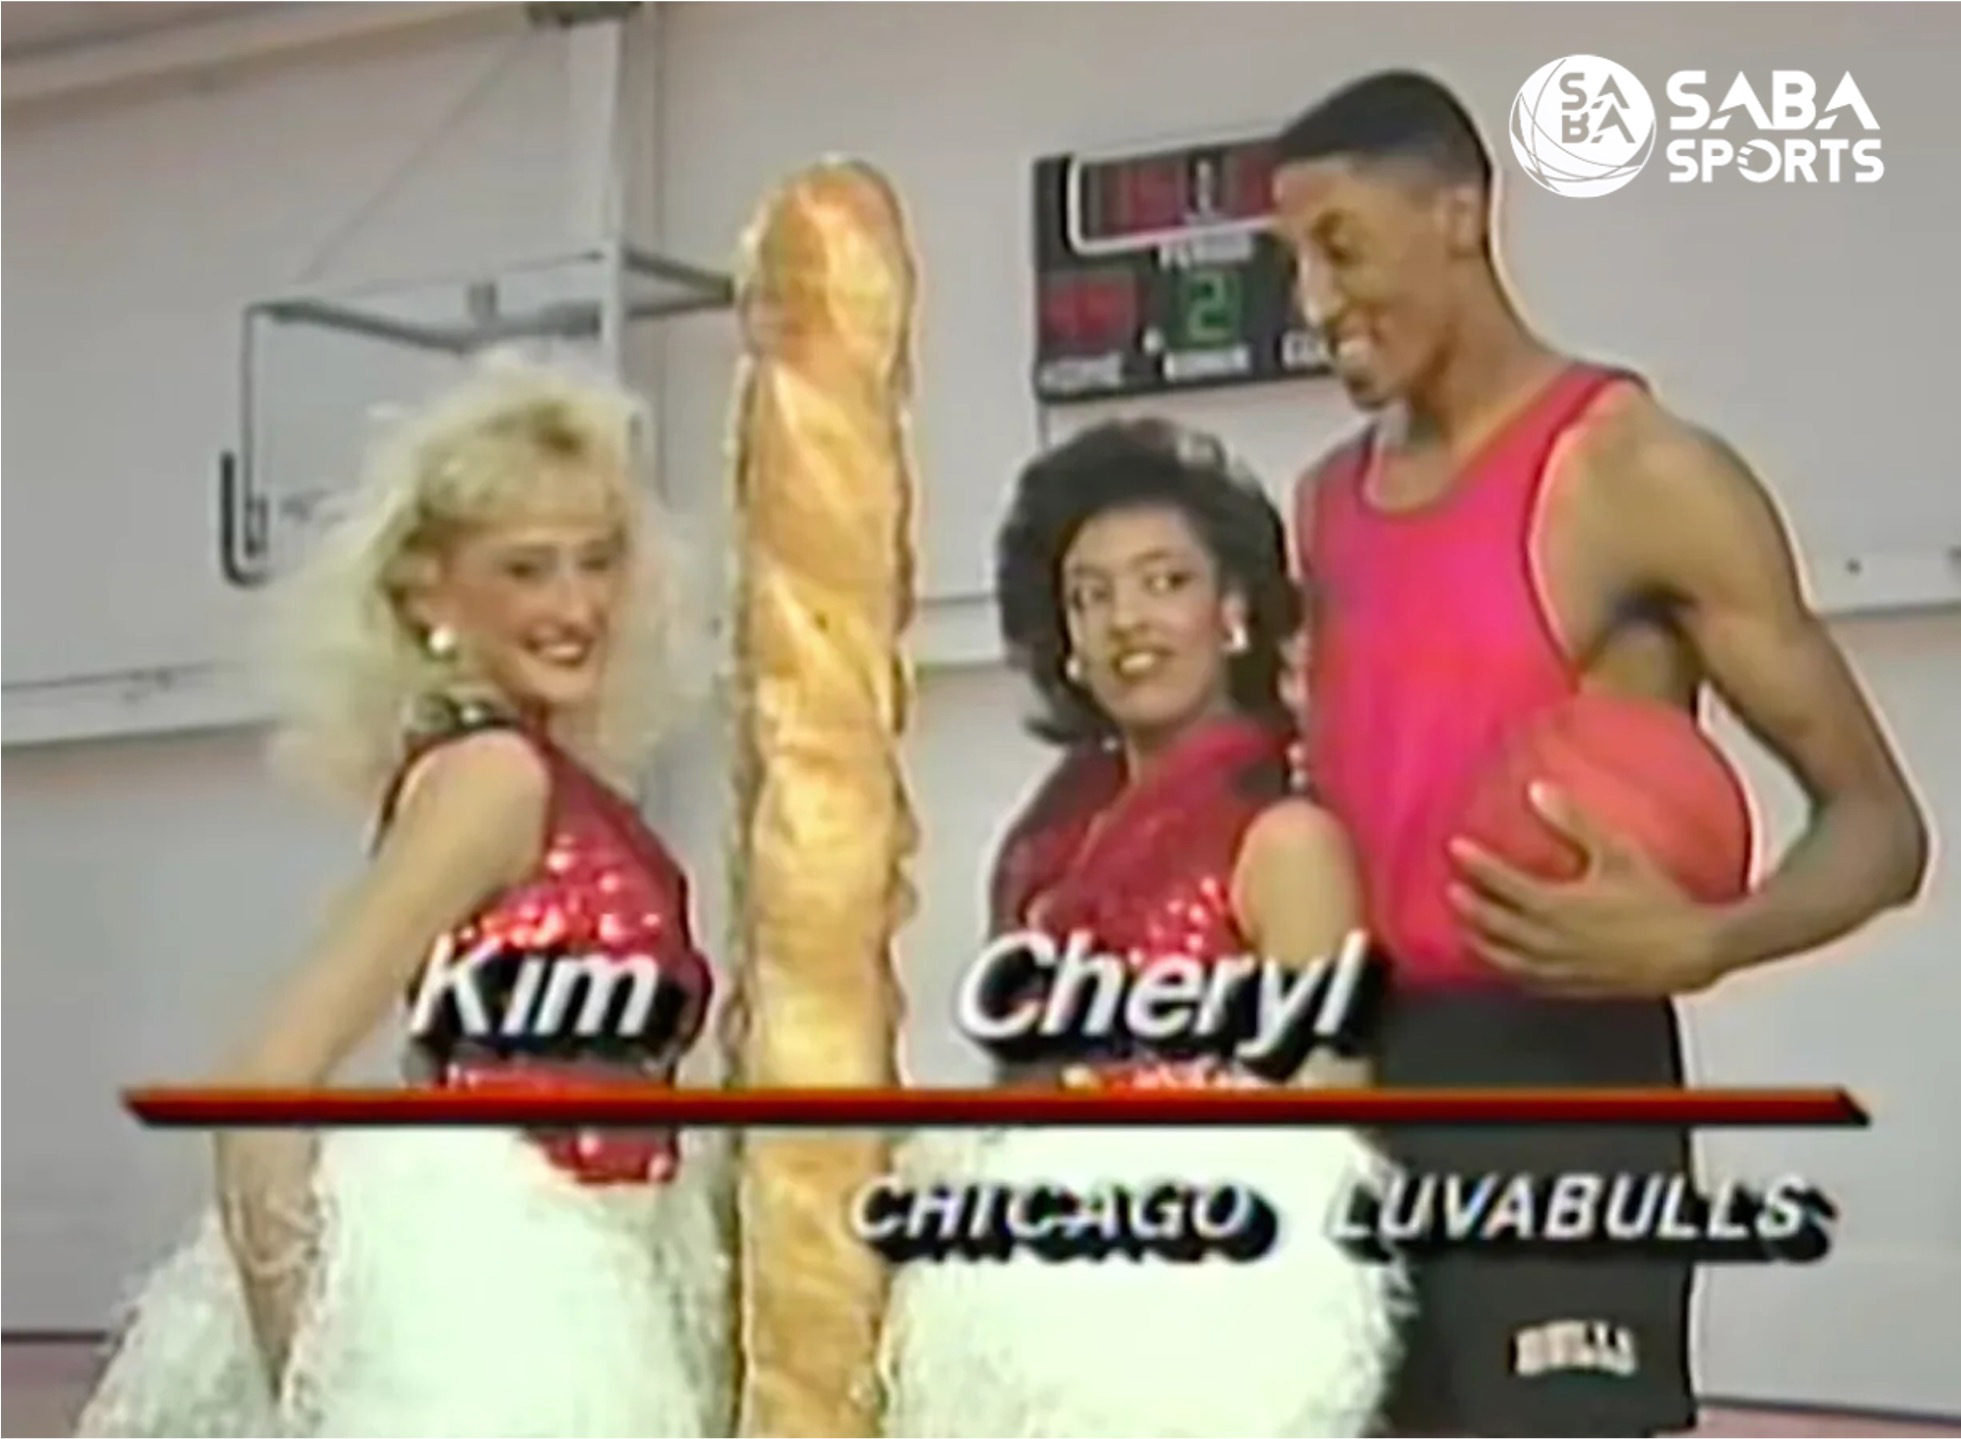 Scottie Pippen Made A Hilarious Commercial For Chicago's Mr. Submarine Subs  During His Career